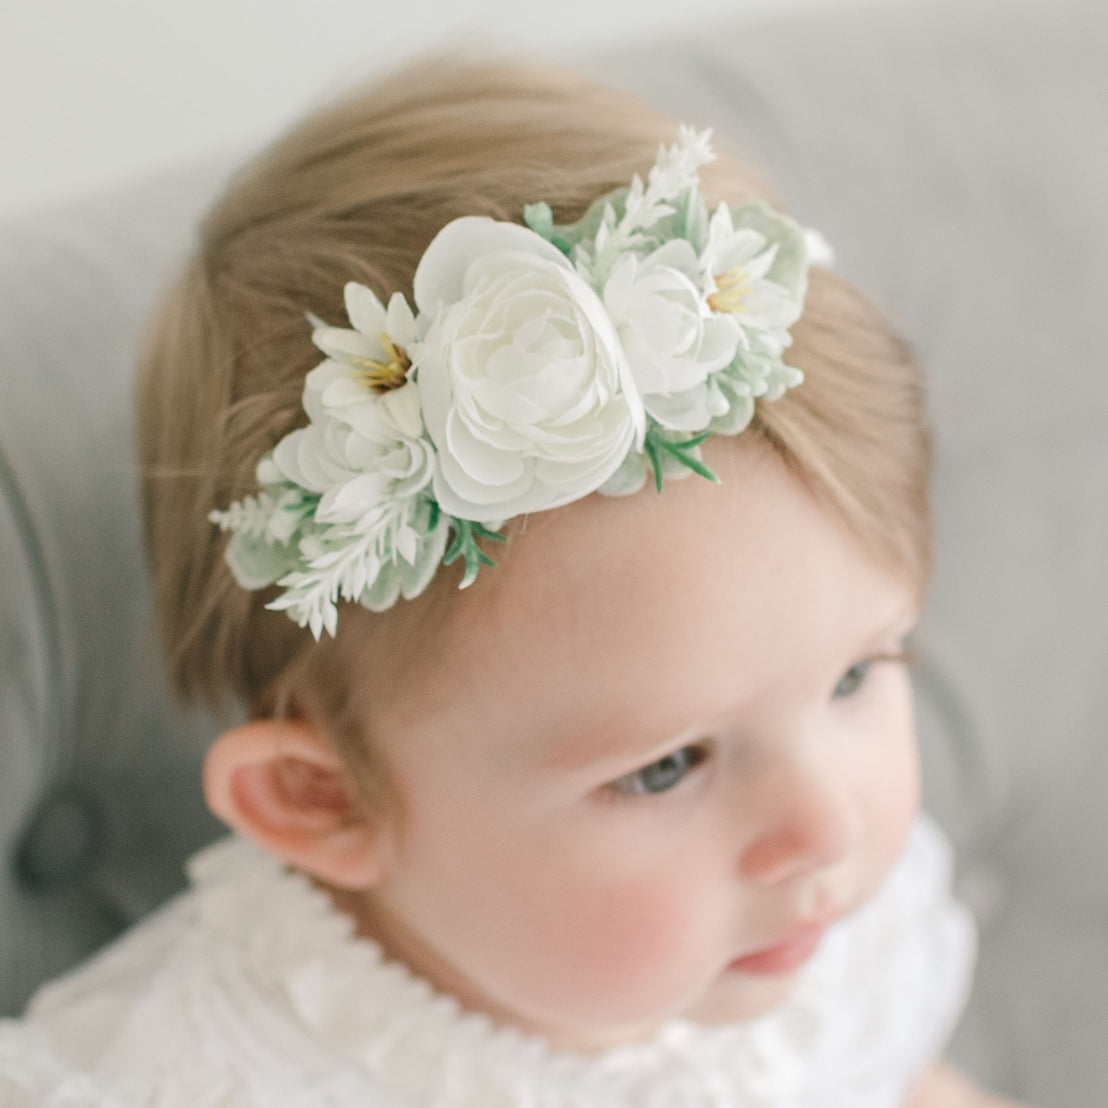 A close-up of a baby girl with light hair wearing the delicate handmade Aria Flower Headband, gazing off to the side. The child is dressed in the Aria Christening Gown.